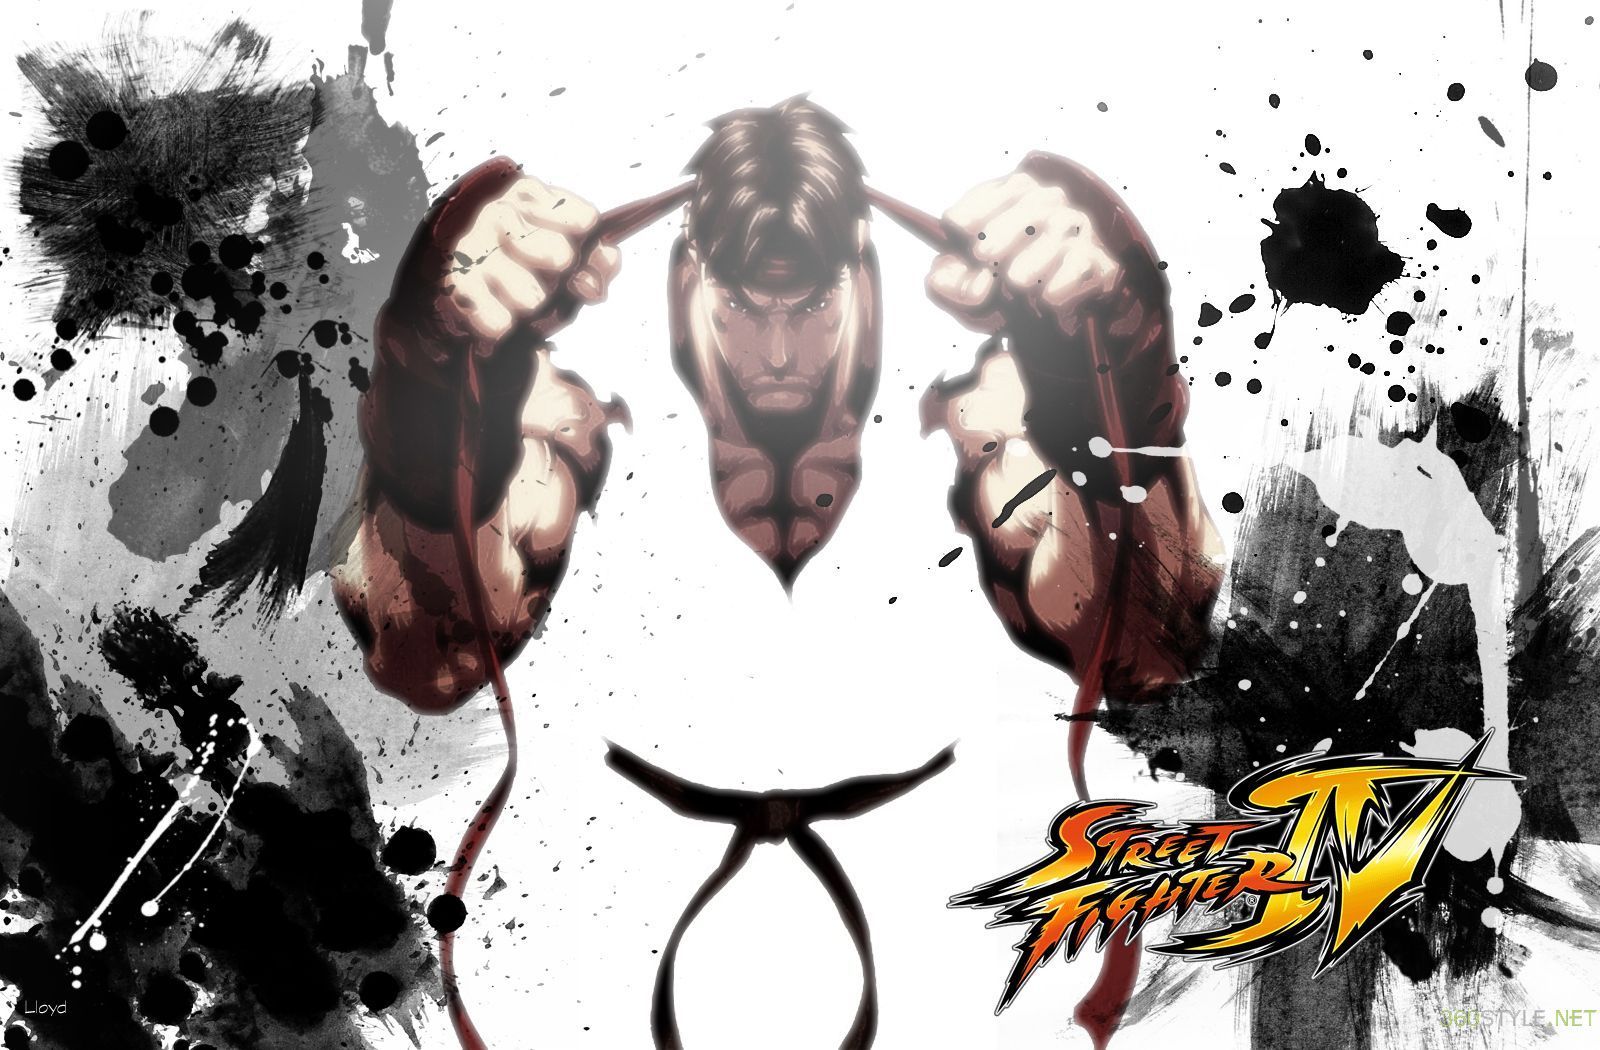 Street fighter iv wallpaper by igotgame1075